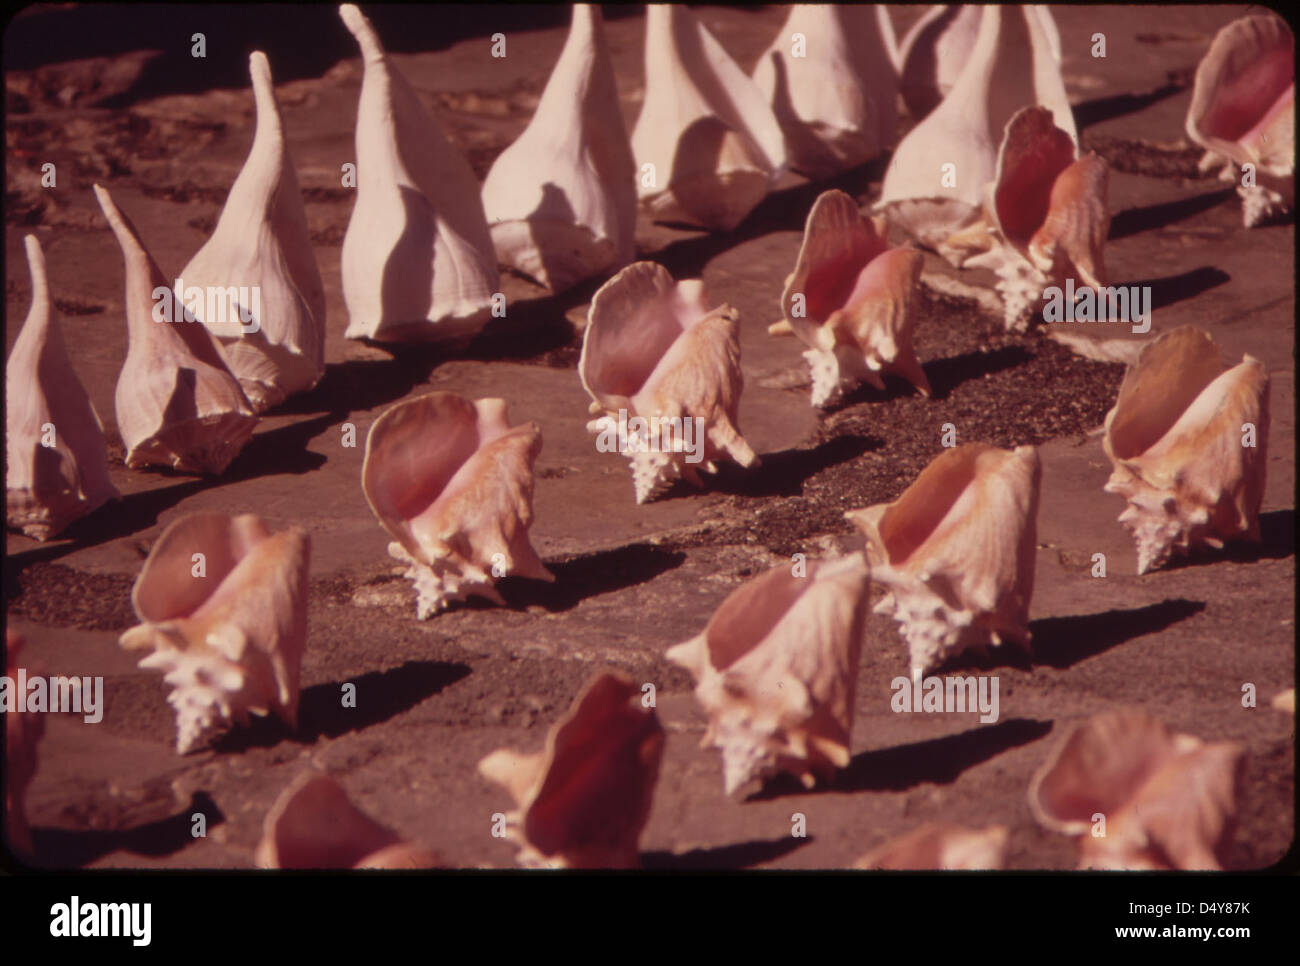 Souvenir Seashells Are Lined Up for Sale Here on the Southernmost Point of the United States. Stock Photo